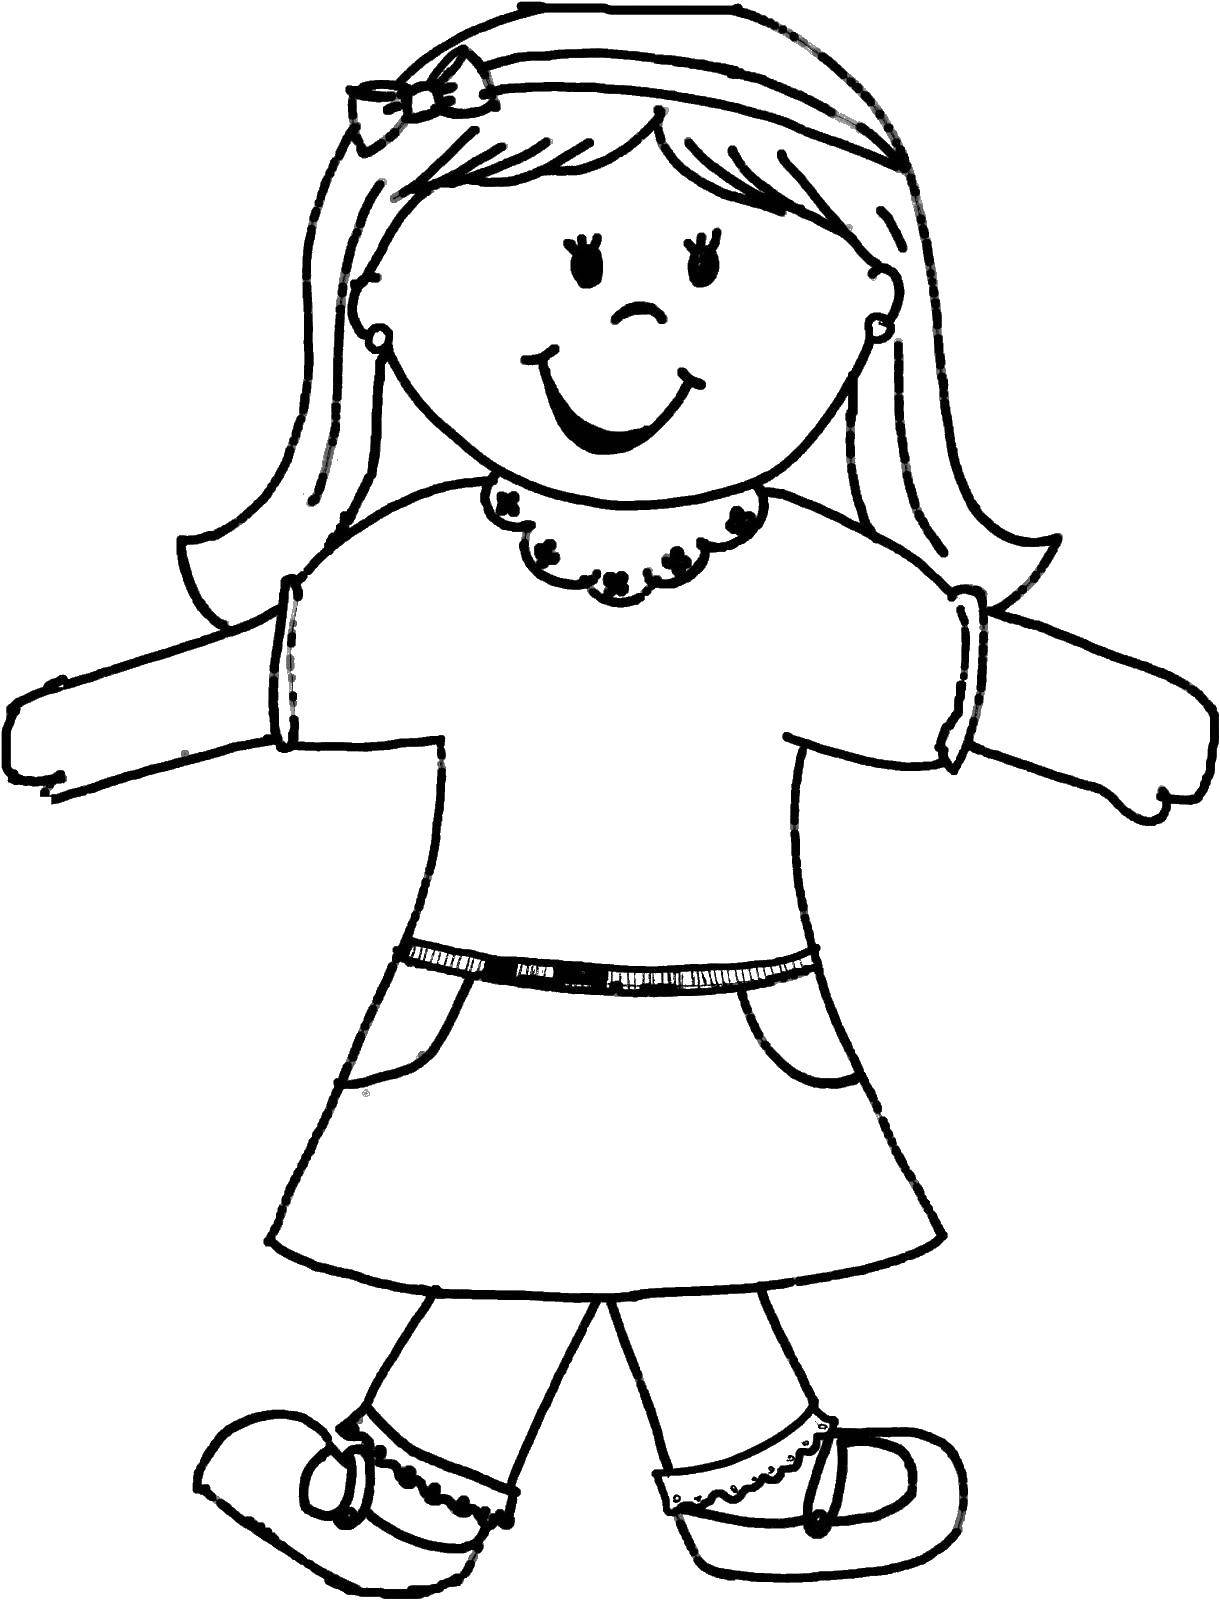 Coloring Doll. Category the clothes and the doll. Tags:  dolls, clothes, doll.